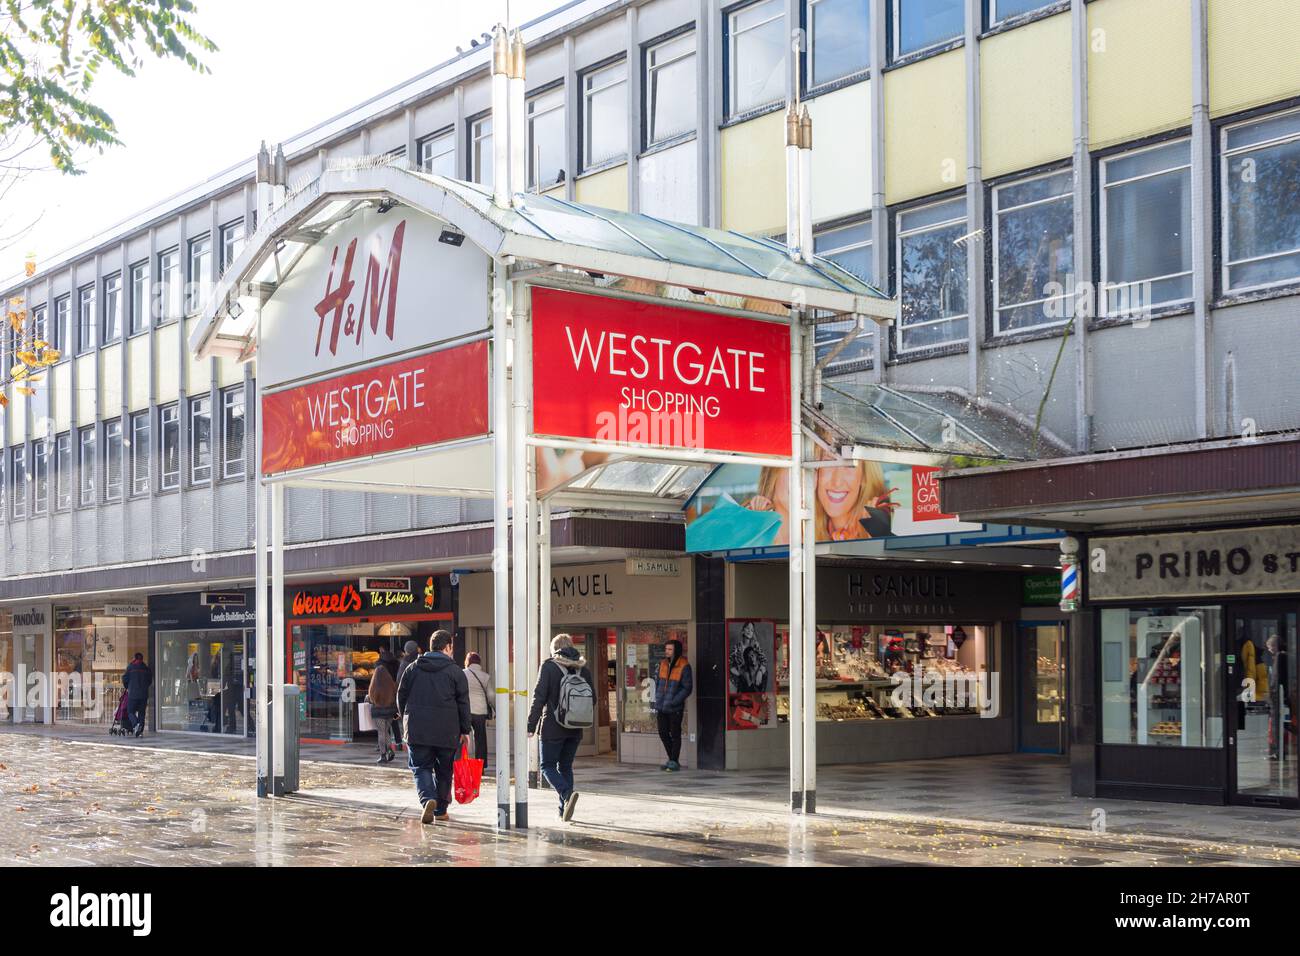 Entrance to Westgate Shopping Centre, Queensway, Stevenage, Hertfordshire, England, United Kingdom Stock Photo